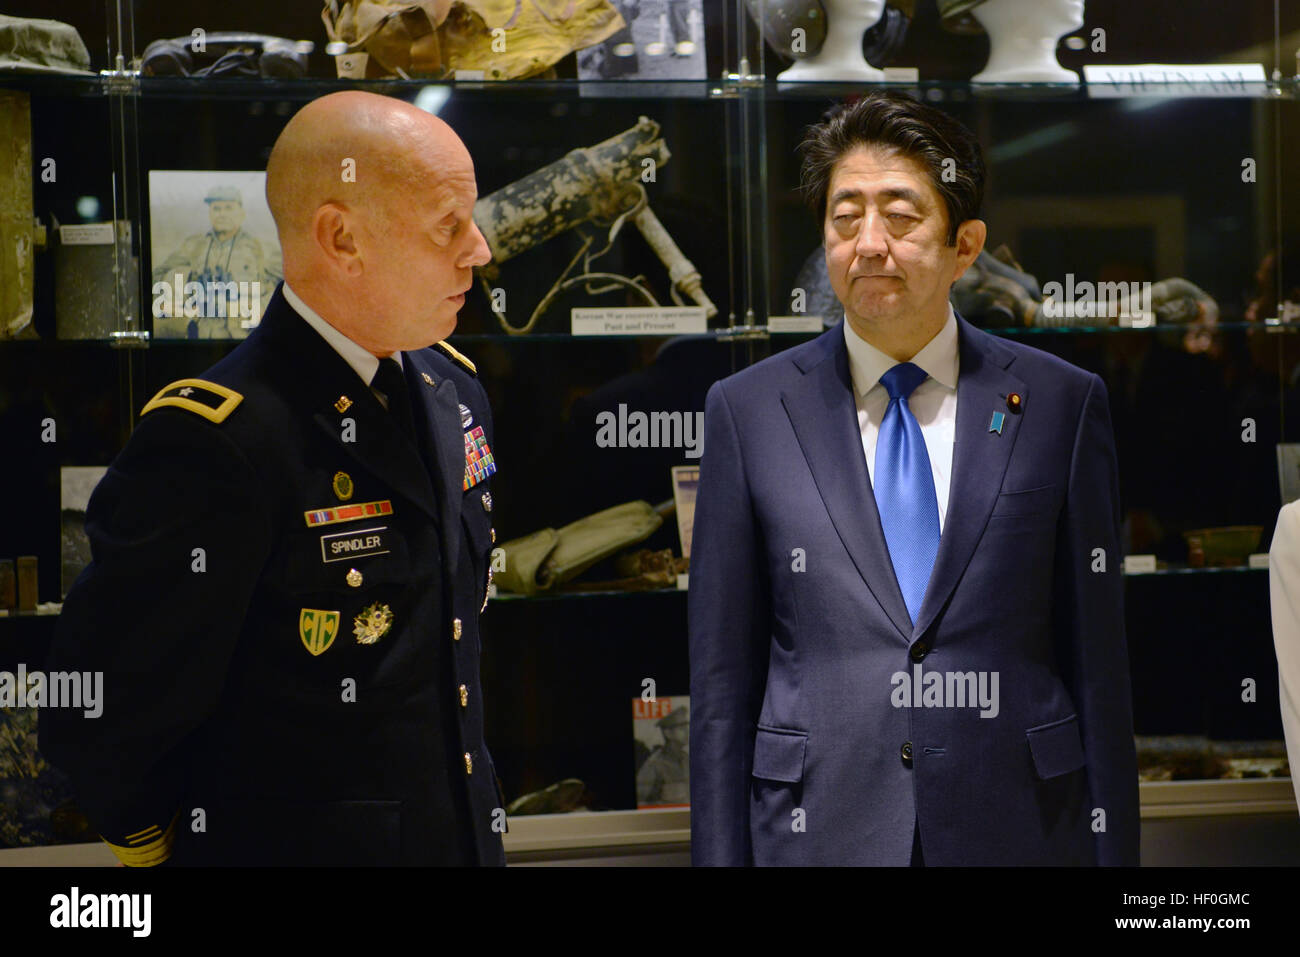 Japanese Prime Minister Shinzo Abe, left, is briefed by Deputy Director U.S. Army Brig. Gen. Mark Spindler, during a tour of the laboratory at the Defense POW/MIA Accounting Agency facility December 26, 2016 in Pearl Harbor, Hawaii. Abe is the first Japanese leader to publicly view the site of the Pearl Harbor Attack. Stock Photo